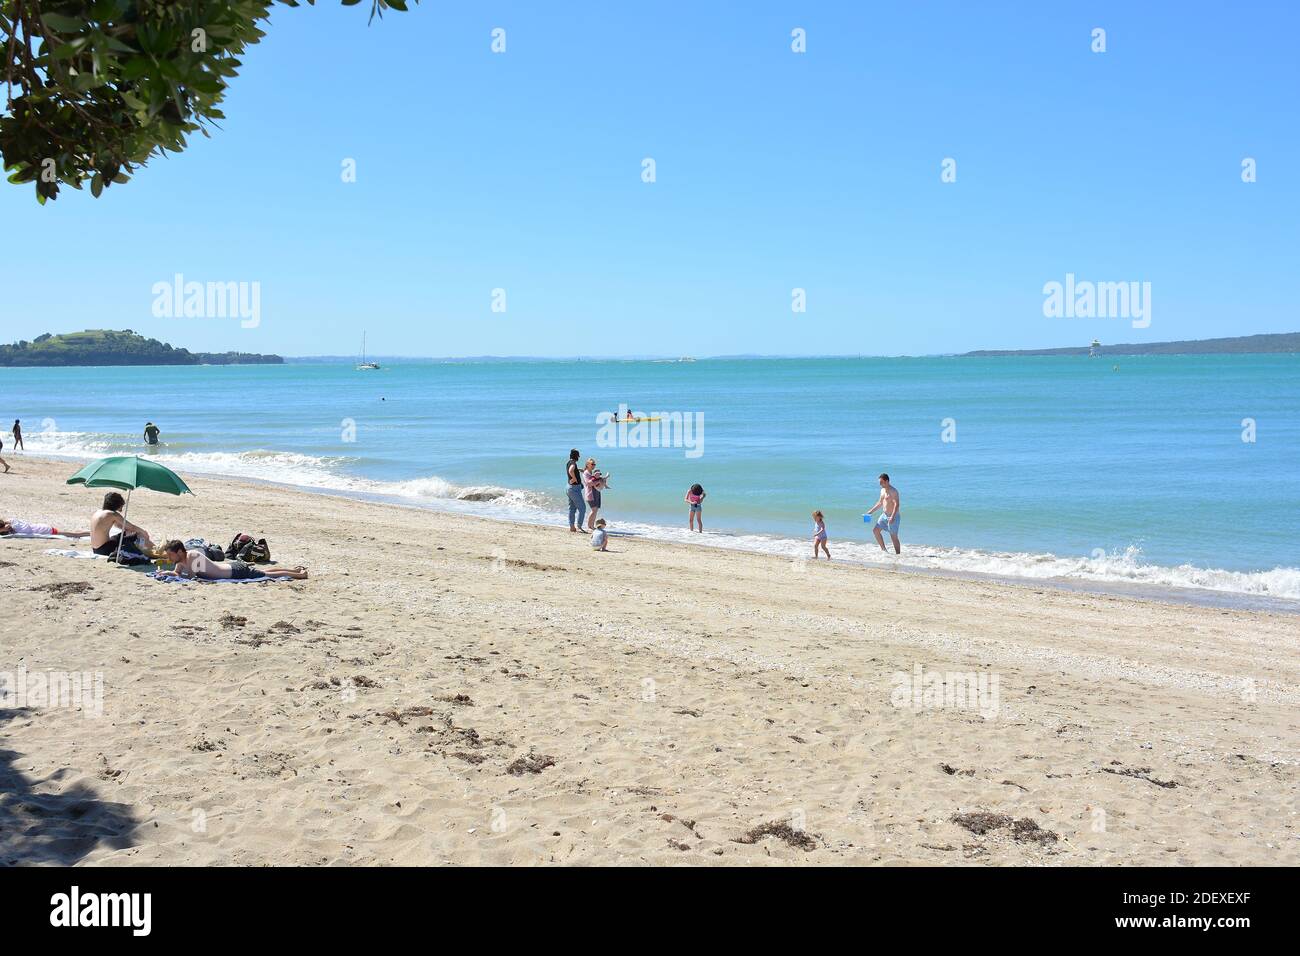 AUCKLAND, NEW ZEALAND - Nov 28, 2020: View of people at Mission Bay beach on sunny weekend day Stock Photo